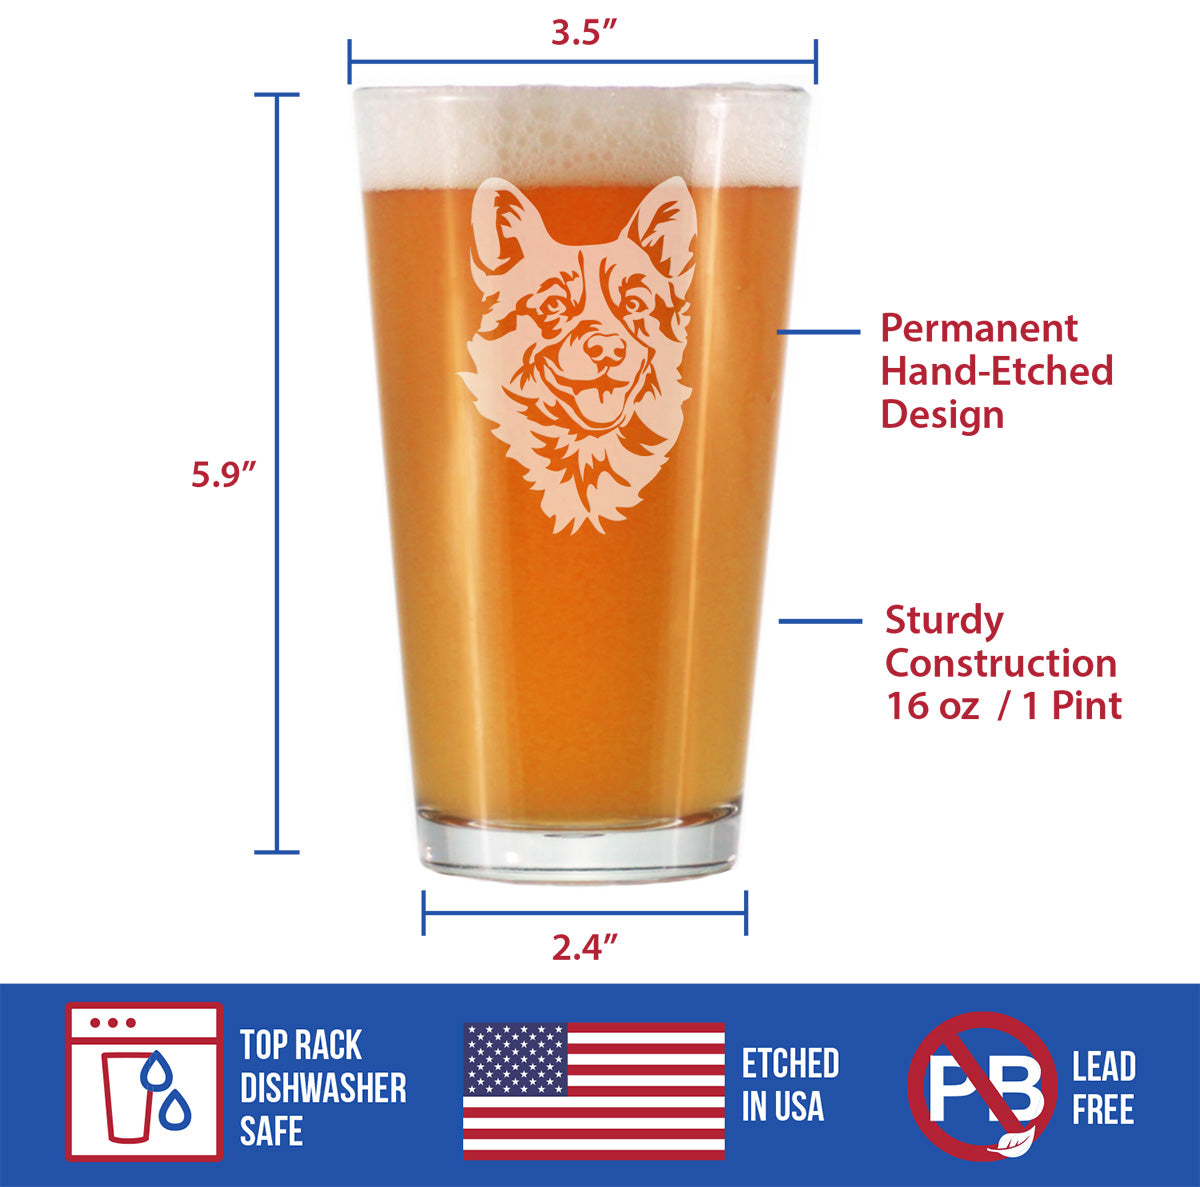 Corgi Face Pint Glass for Beer - Unique Dog Themed Decor and Gifts for Moms &amp; Dads of Welsh Corgies- 16 Oz